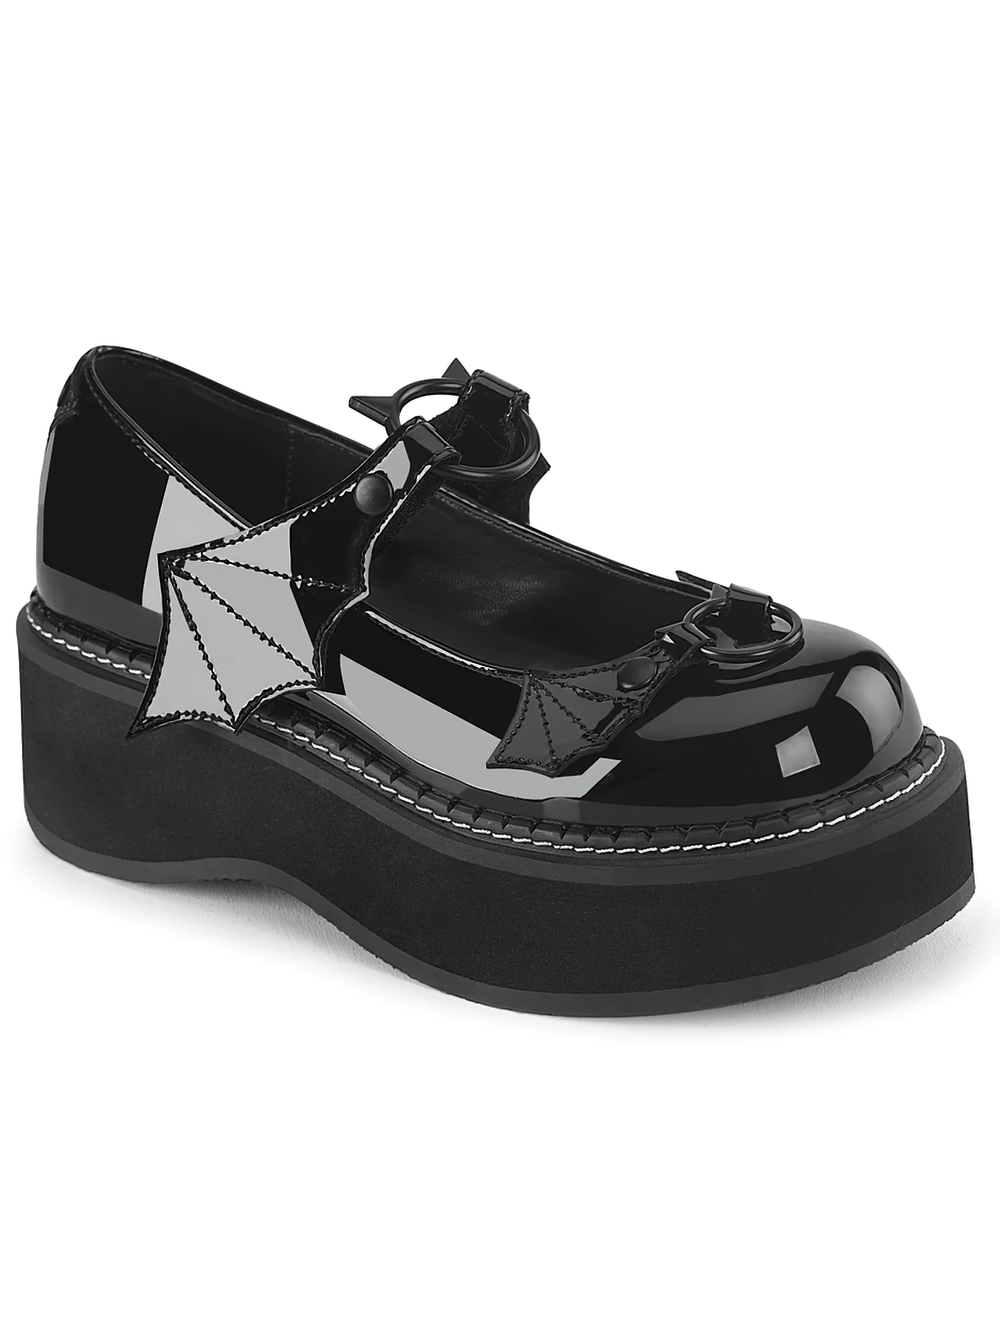 DEMONIA Platform Mary Jane Shoes with Batwing Hook Strap